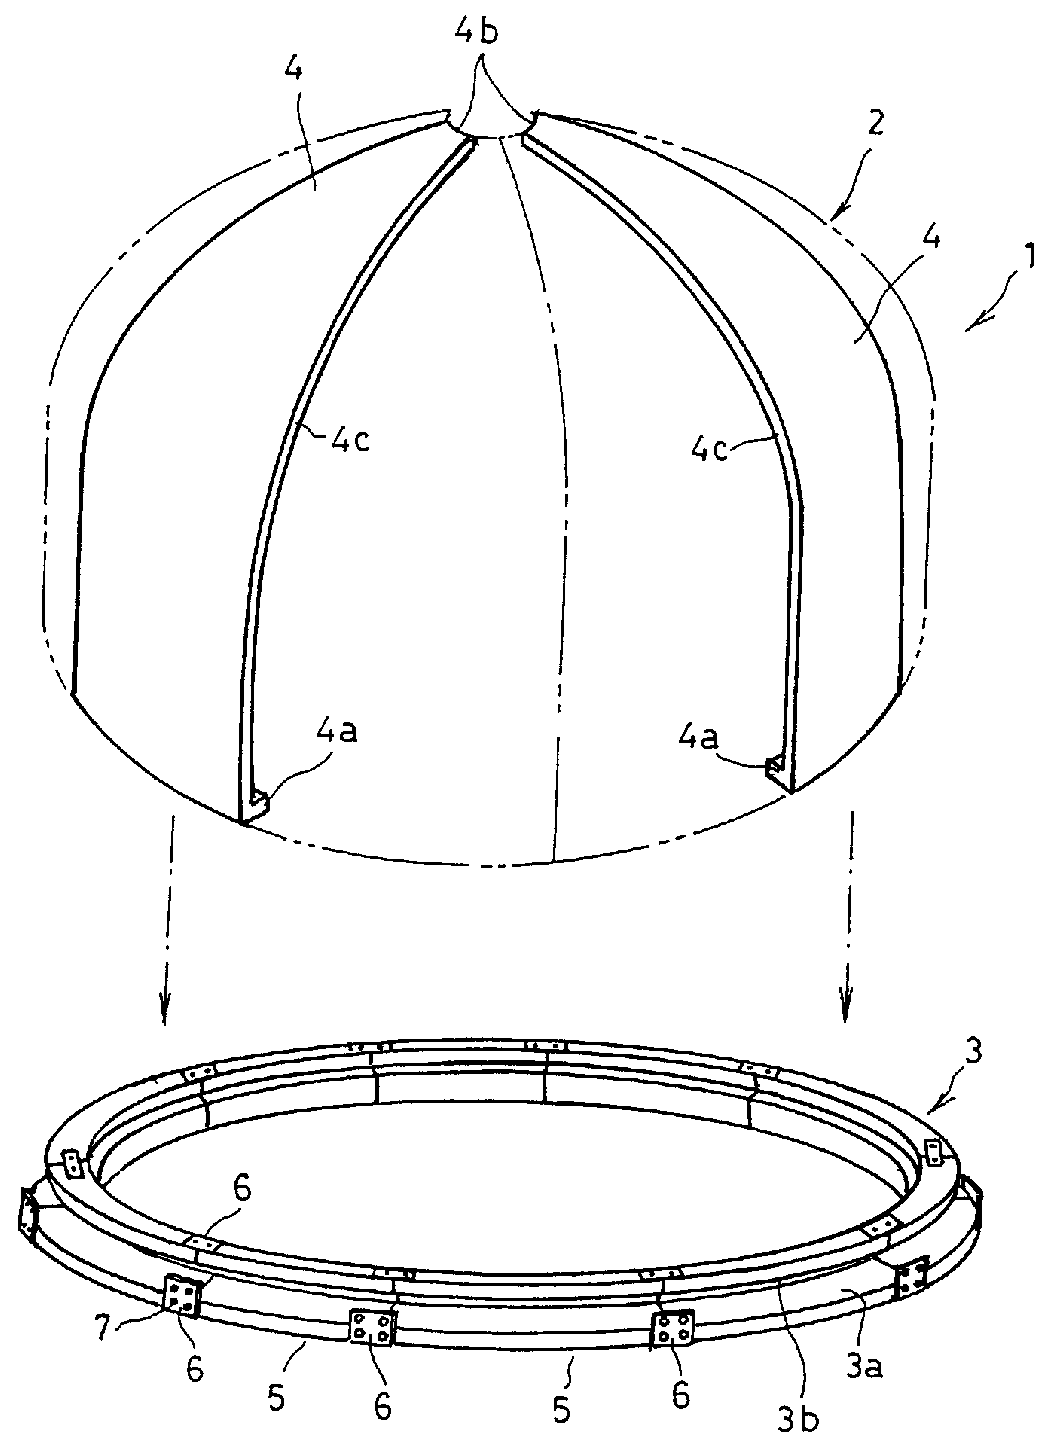 Knockdown structure and methods of assembling same